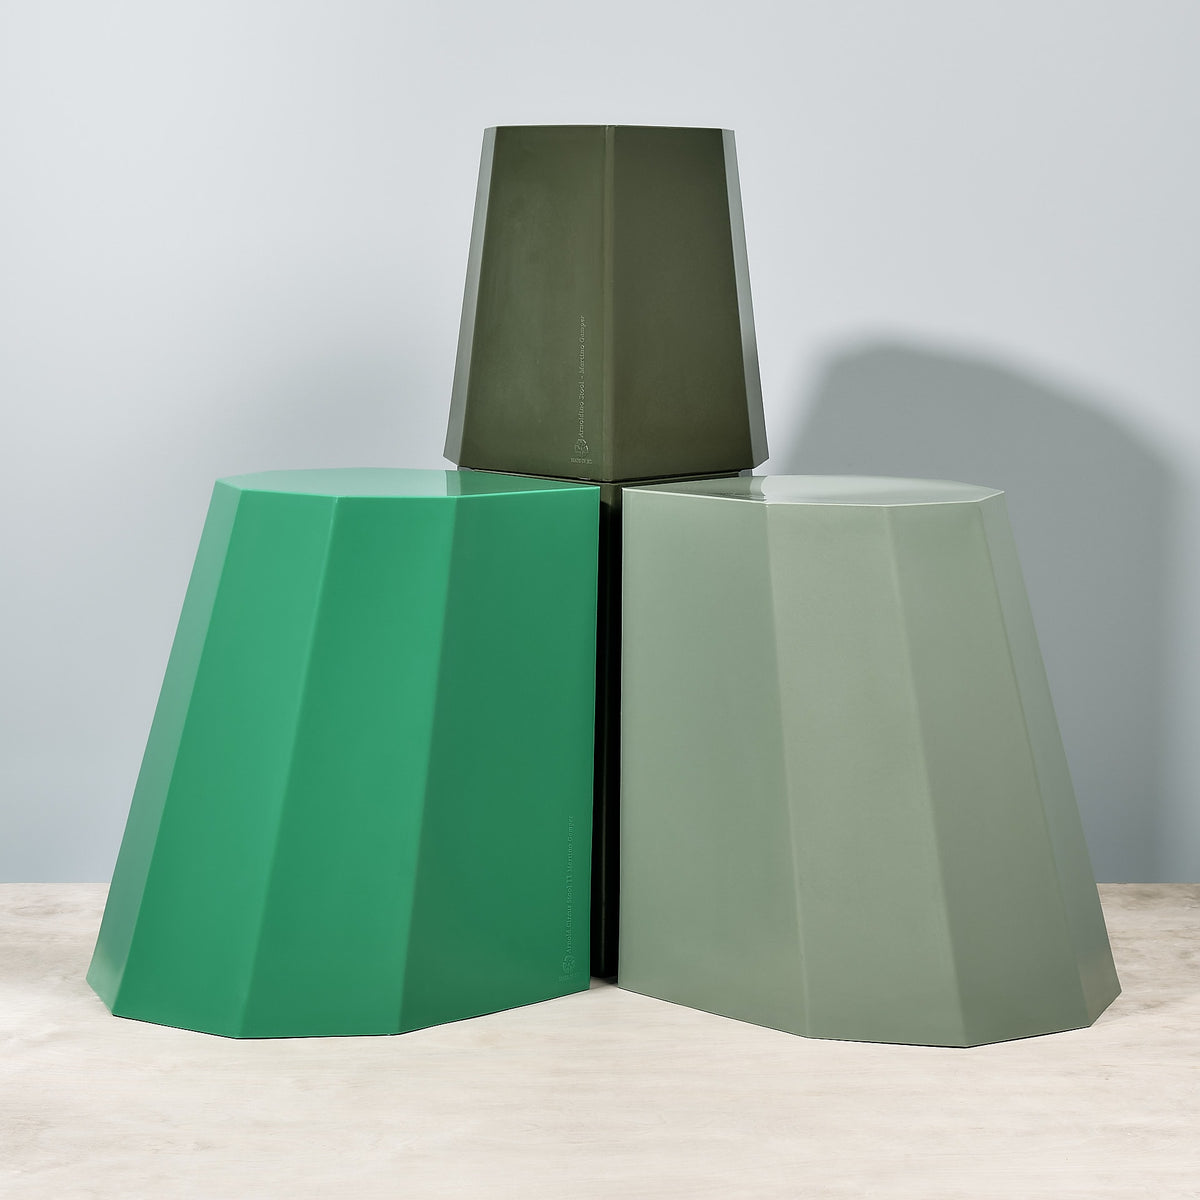 Three Arnold Circus Stools - Sage by Martino Gamper on a wooden table.